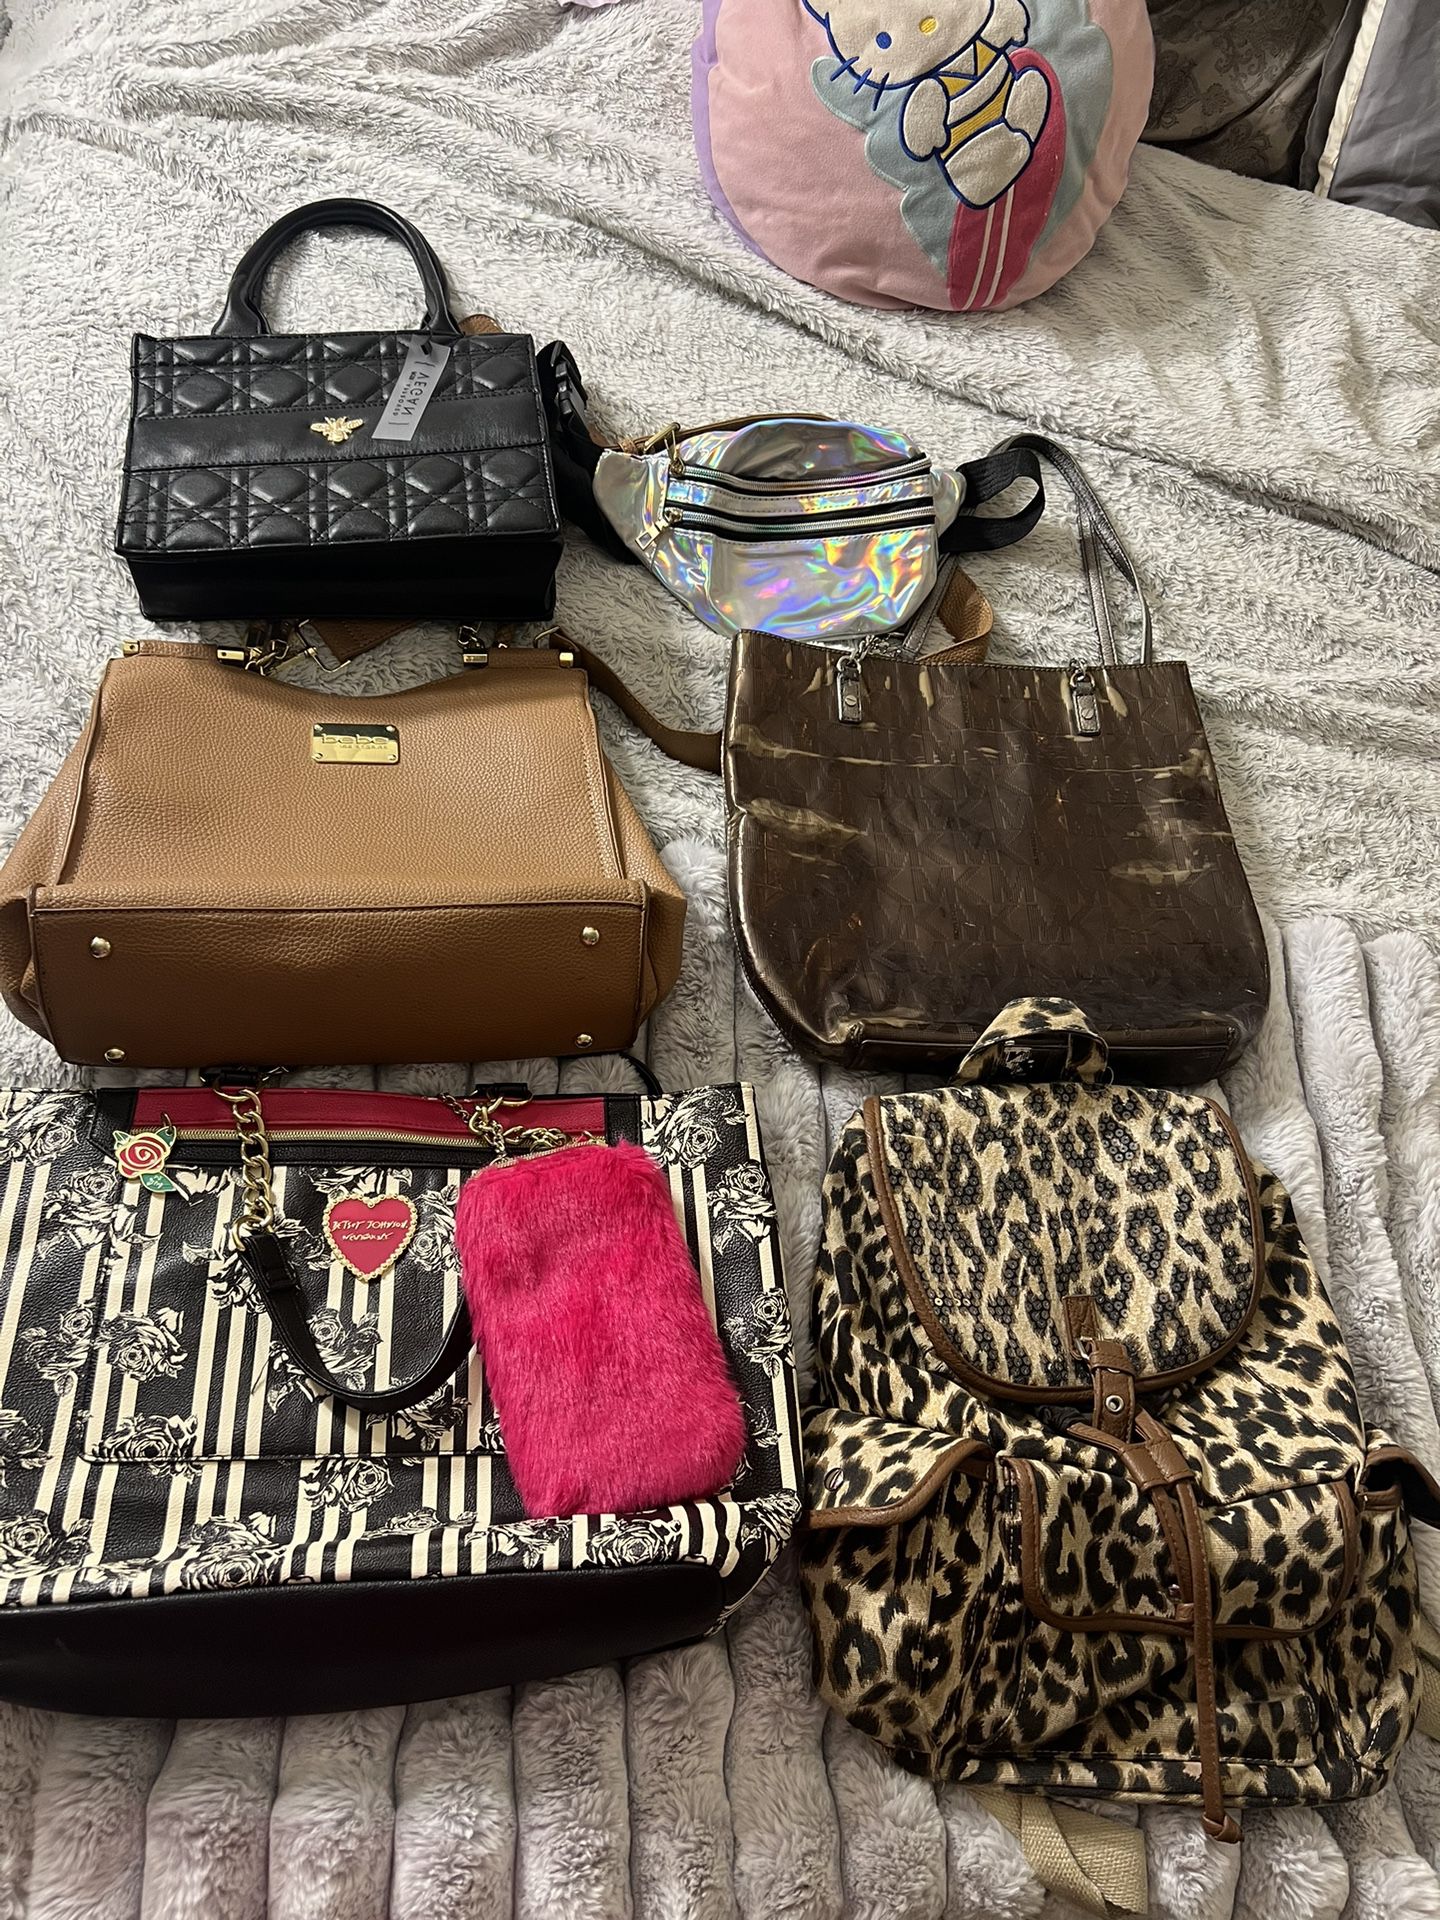 Purses And Bags 